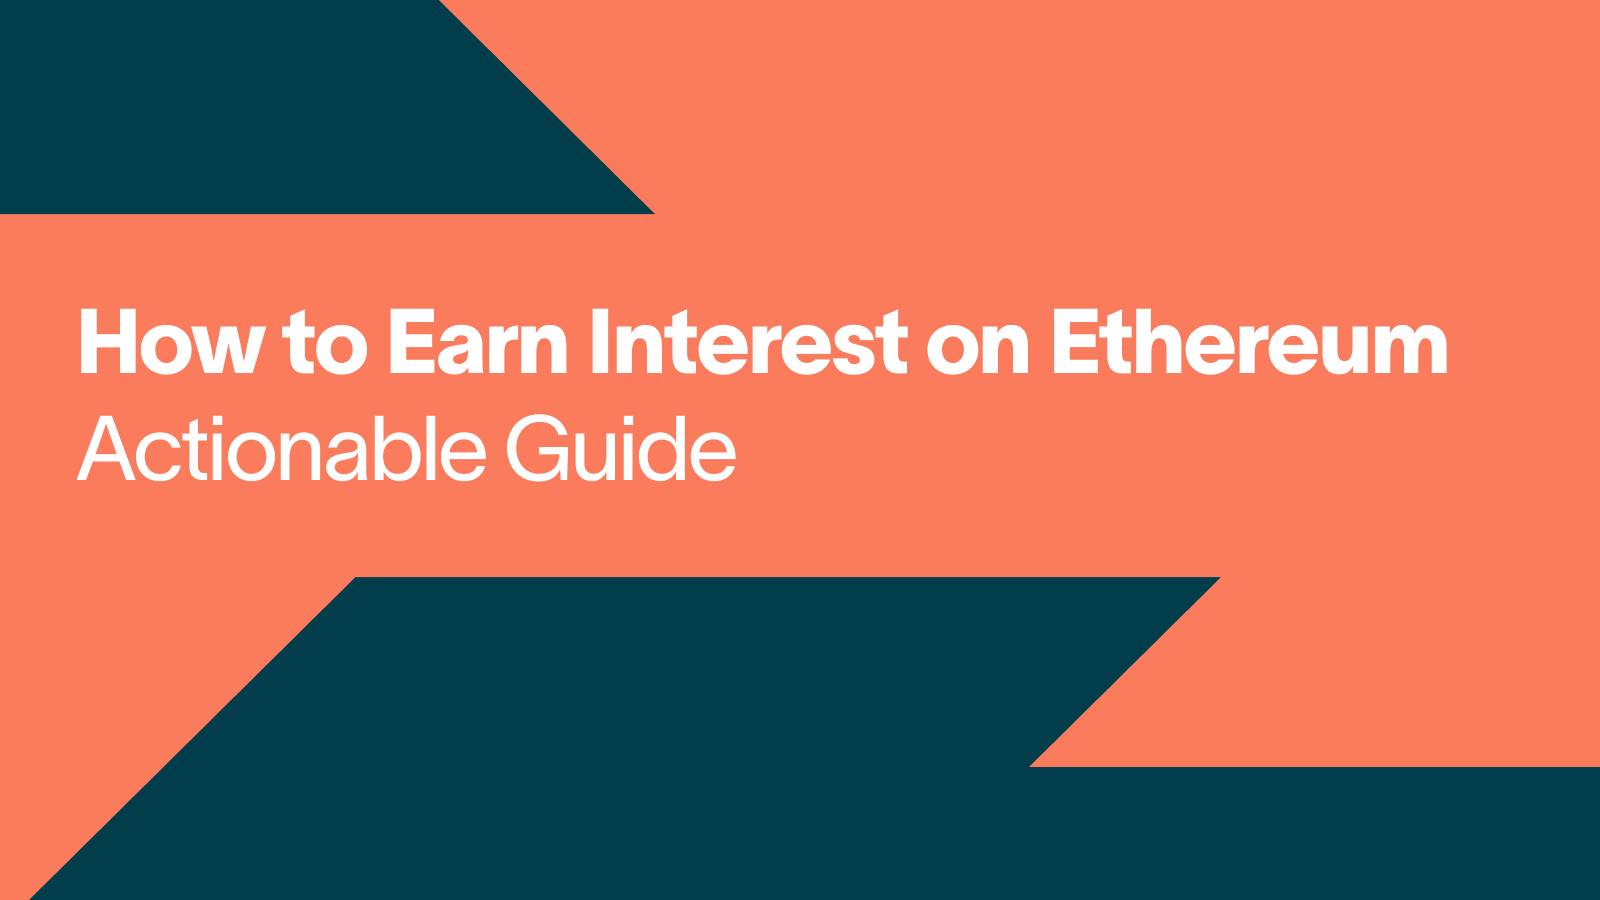 How to Earn Interest on Ethereum - Actionable Guide